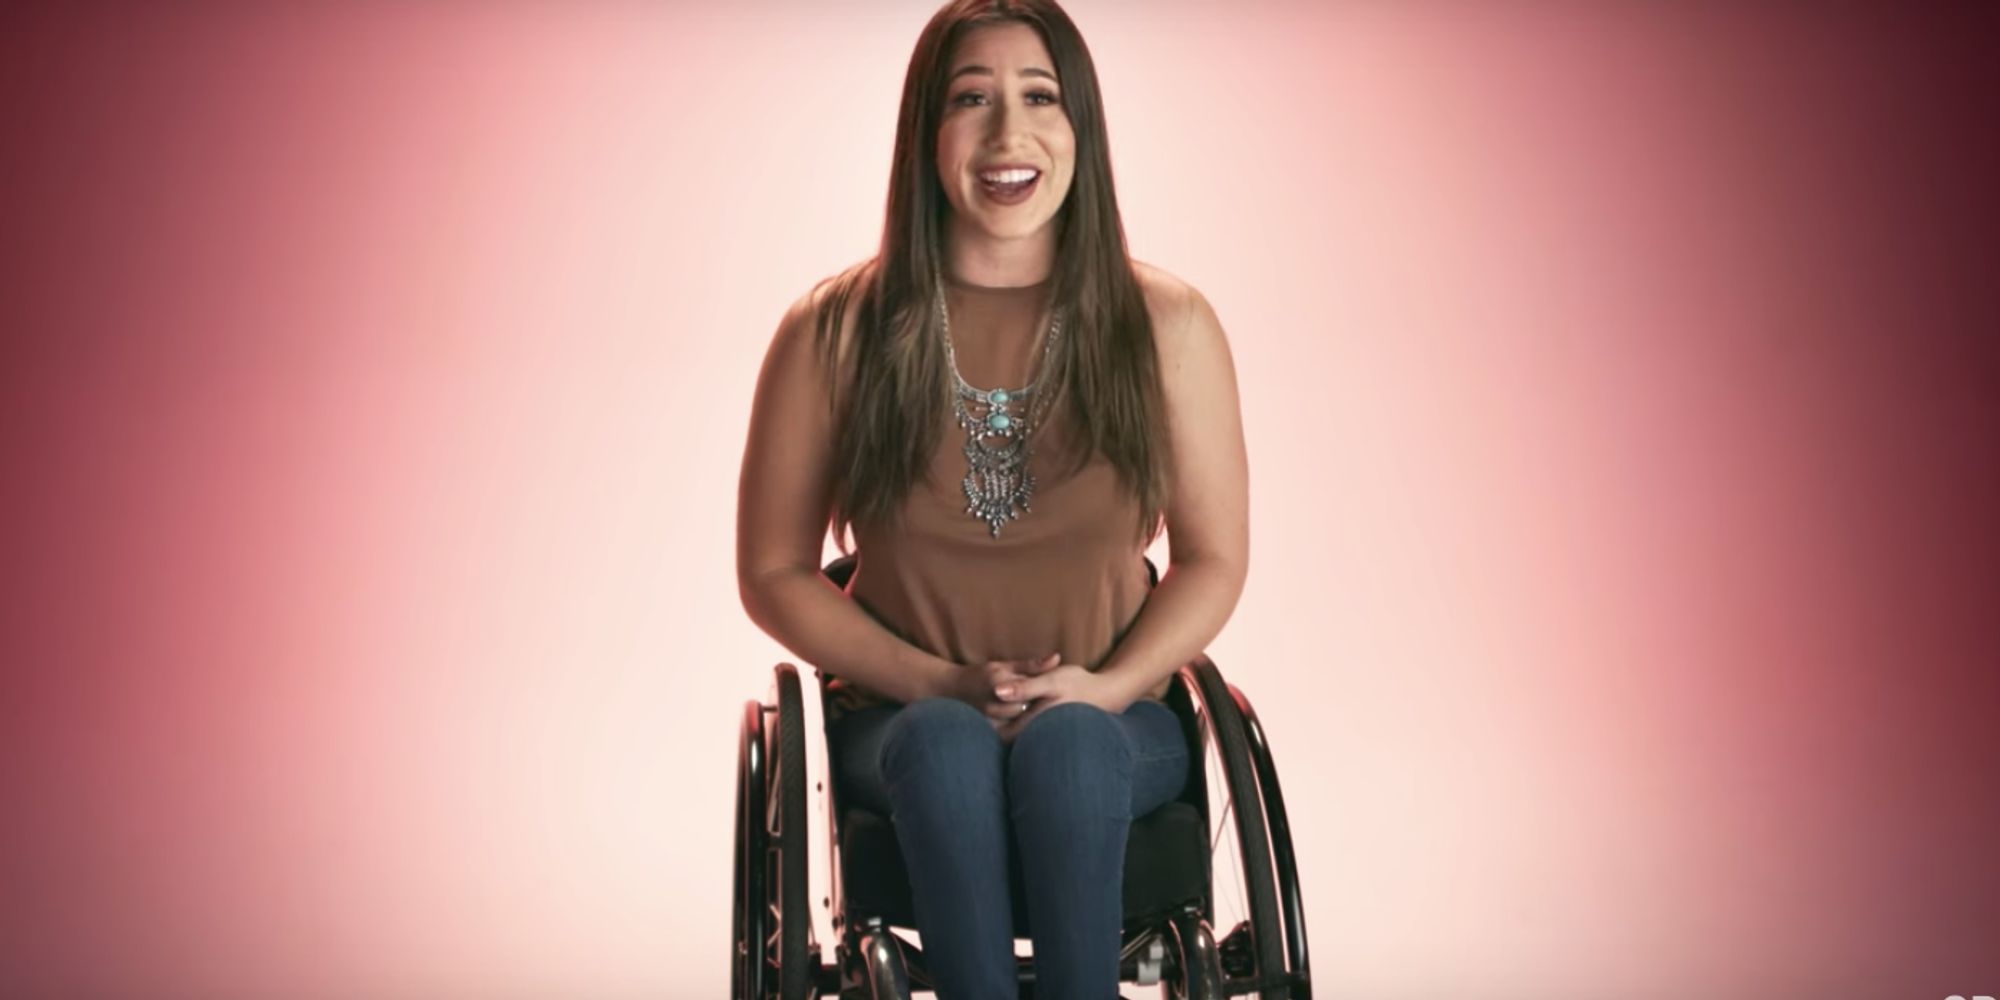 Heres What People With Disabilities Want You To Know The Huffington Post 